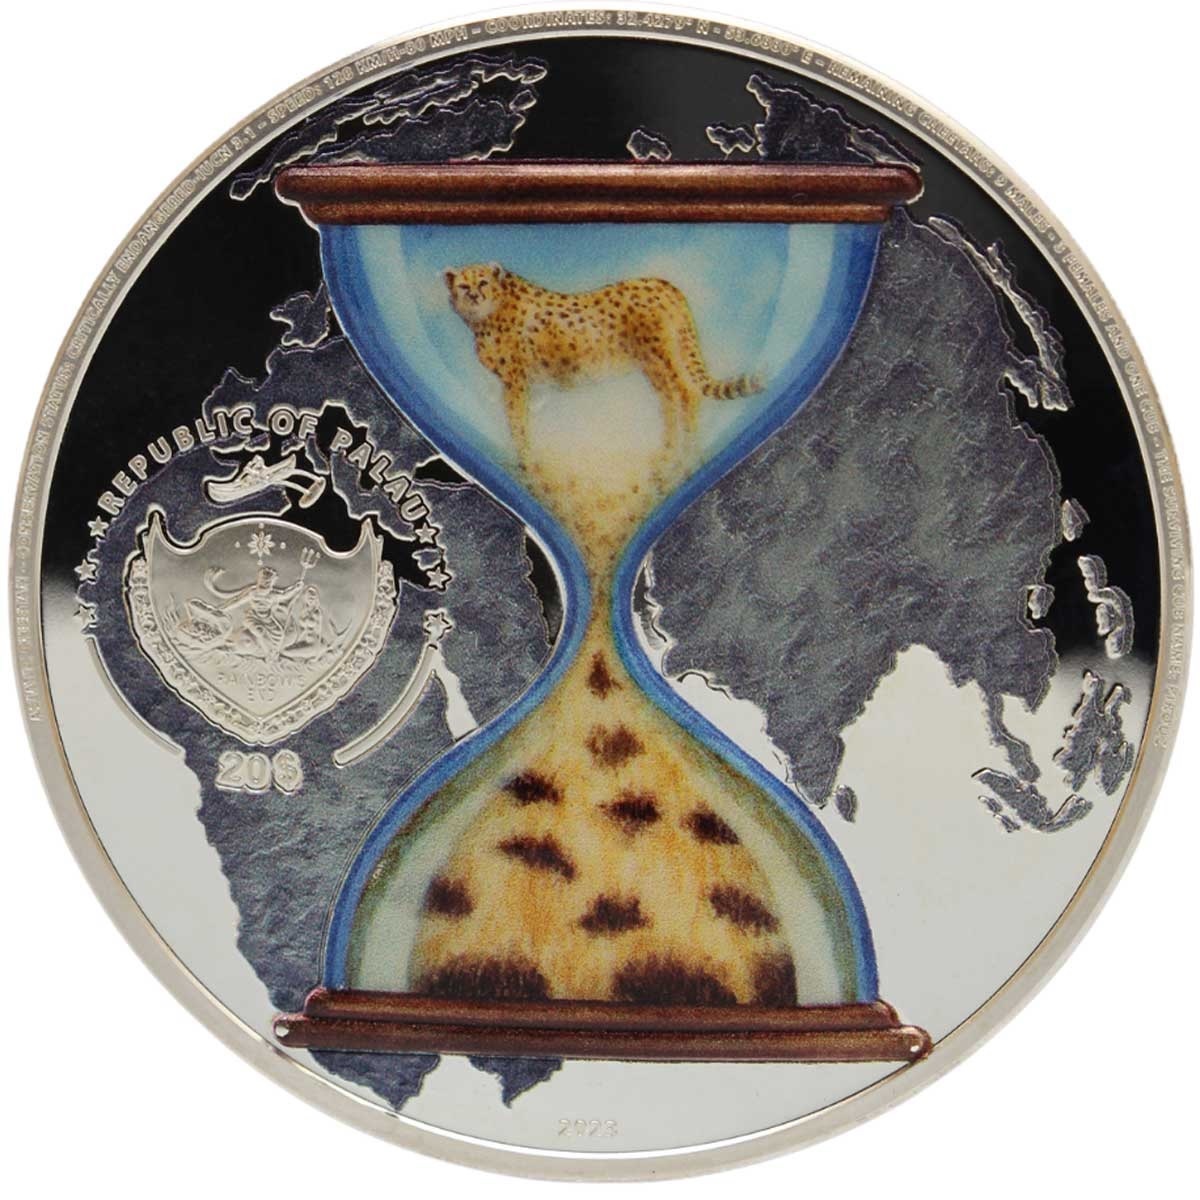 (W168.1.20.D.2023.11) Palau 20 Dollars Asiatic cheetah 2023 - Proof silver Obverse (zoom)